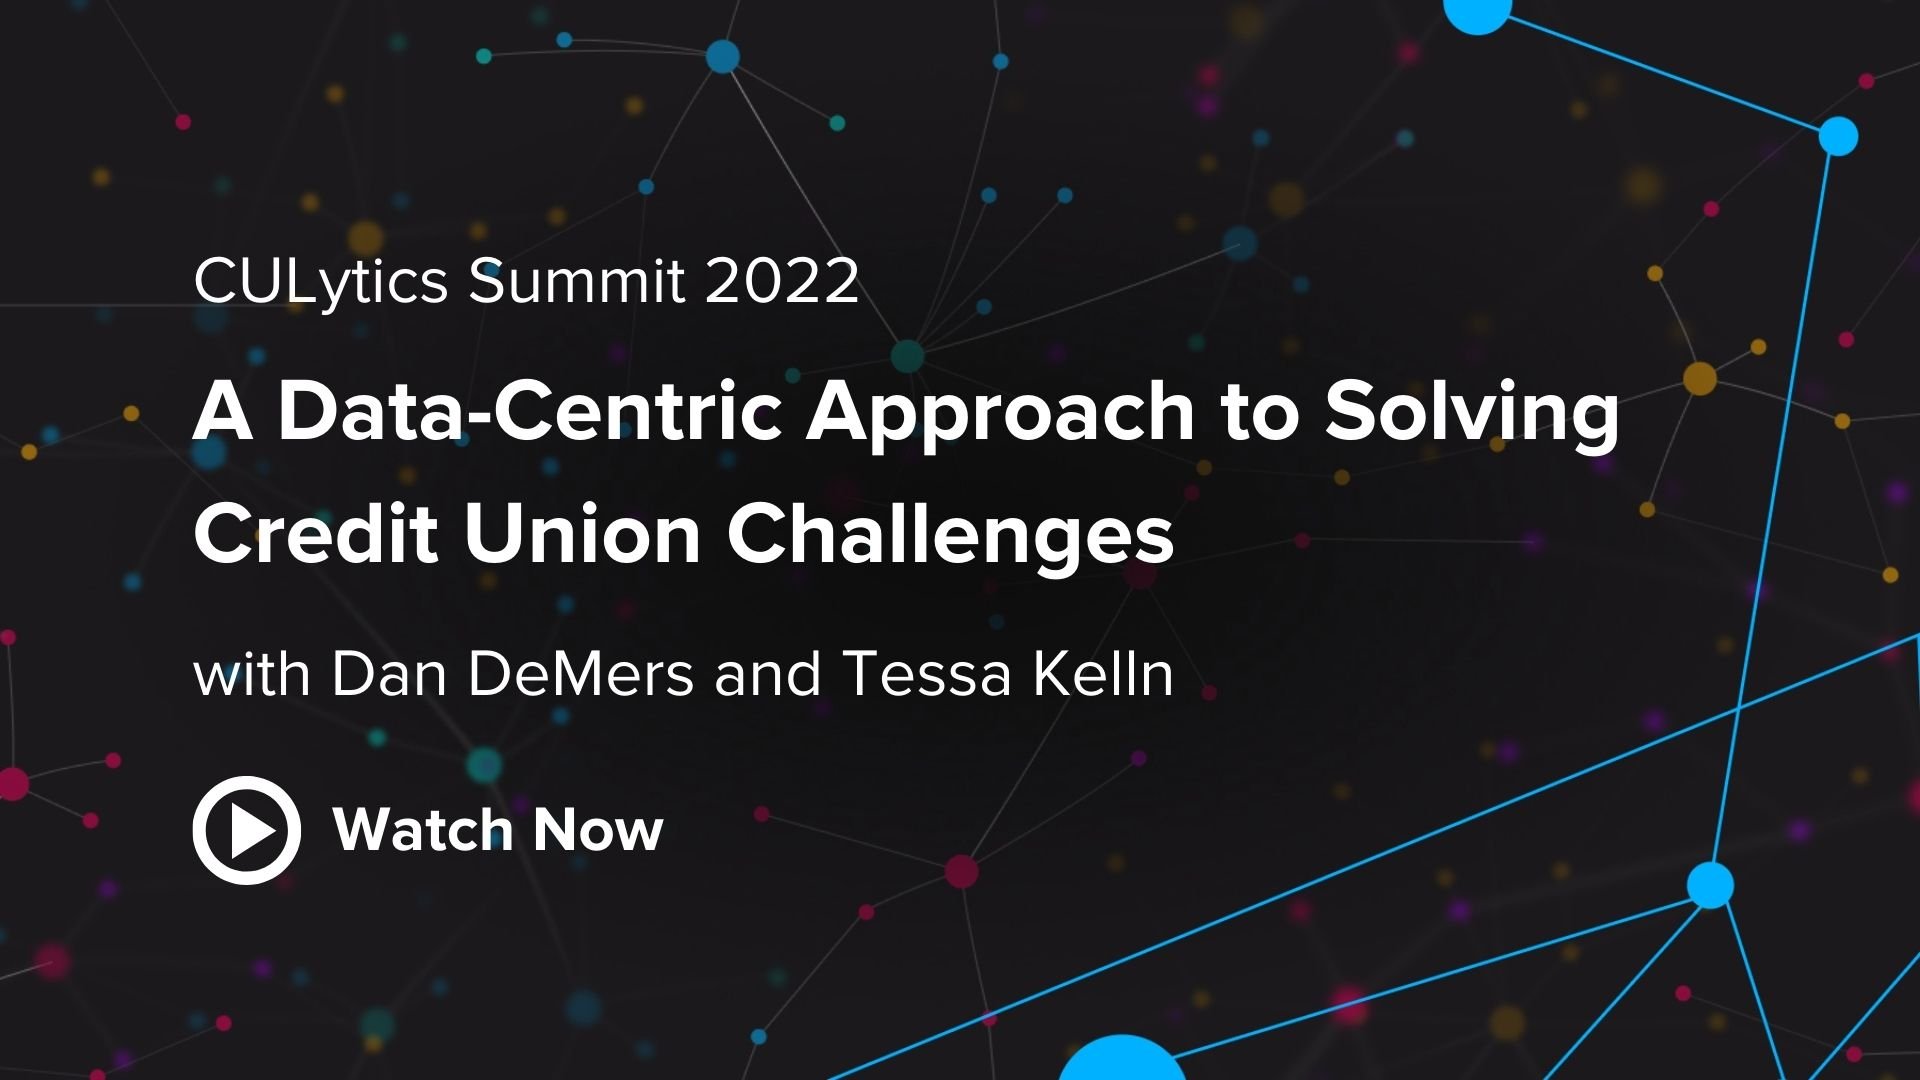 A Data-Centric Approach to Solving Credit Union Challenges